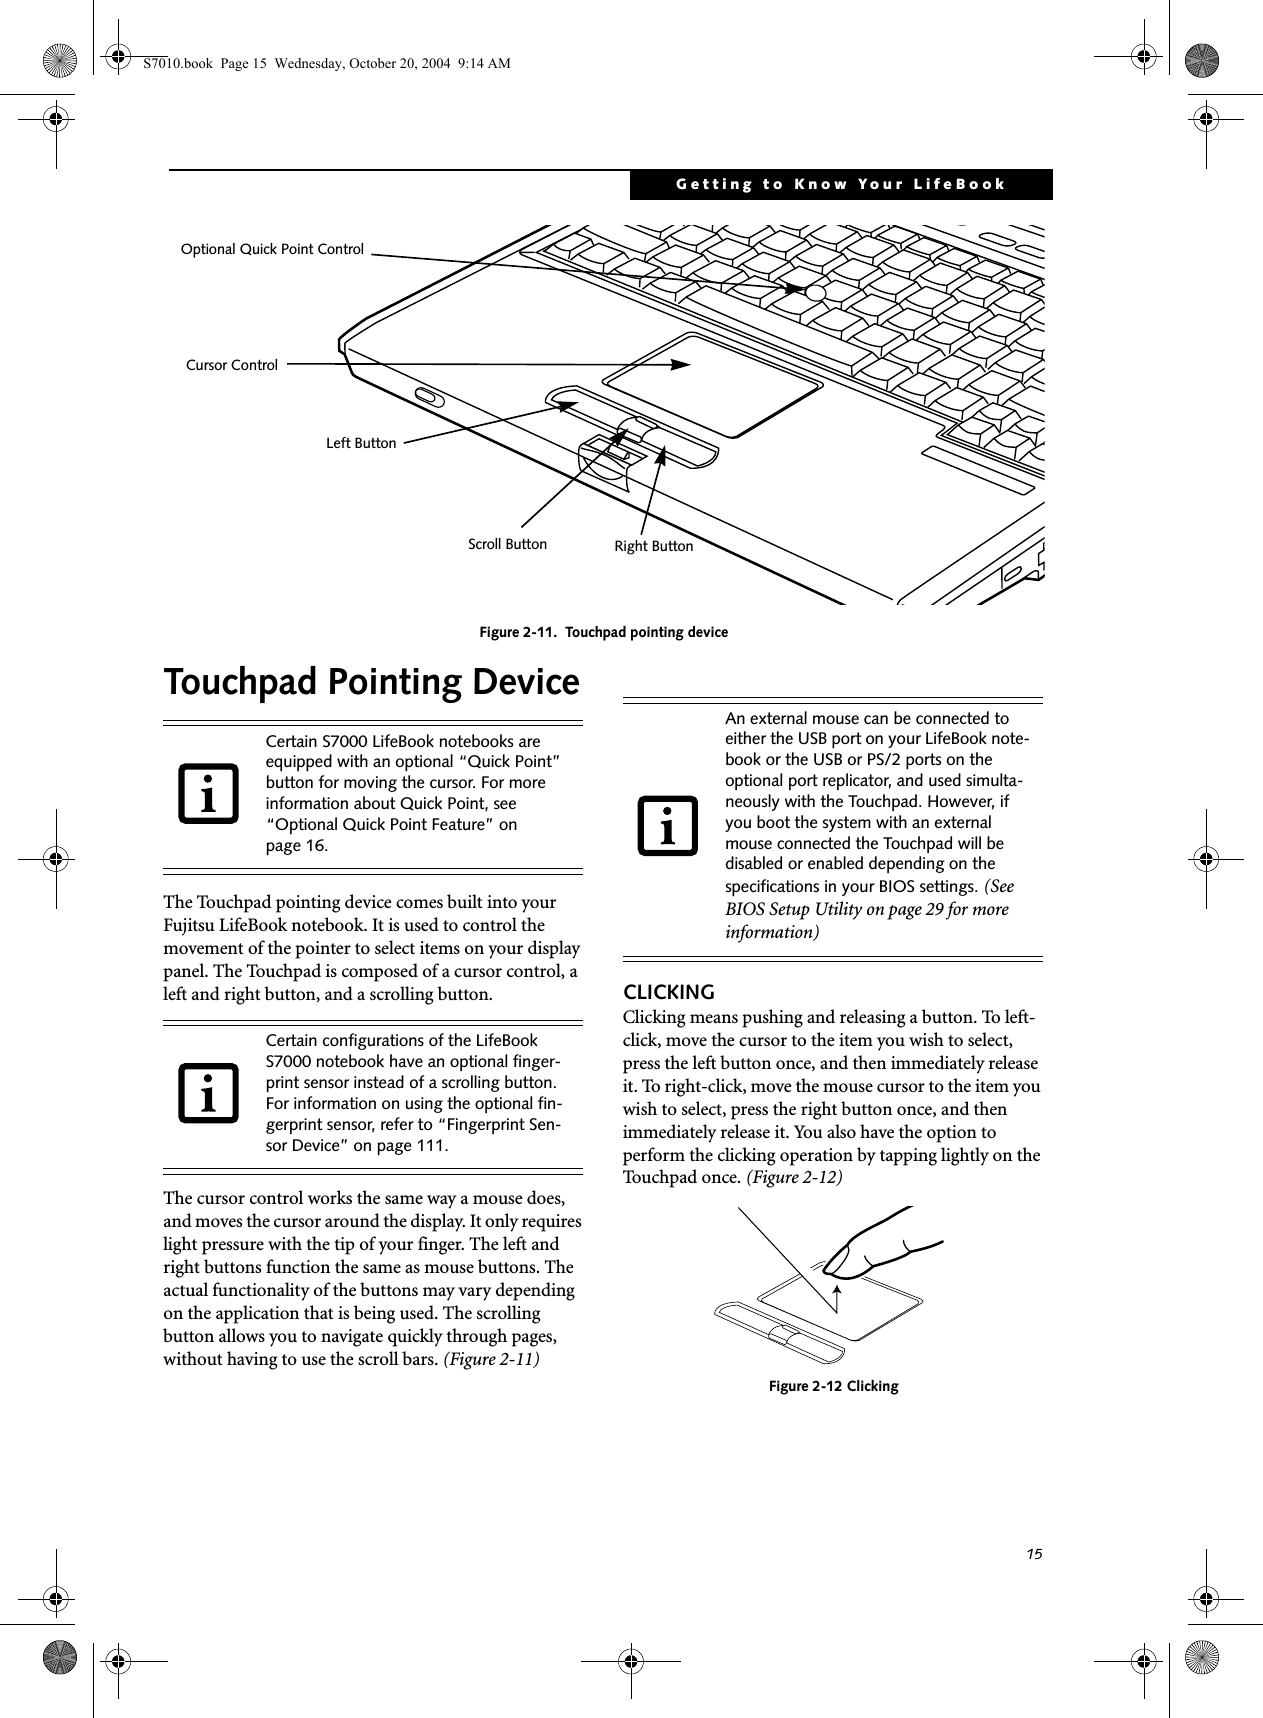 15Getting to Know Your LifeBookFigure 2-11.  Touchpad pointing deviceTouchpad Pointing DeviceThe Touchpad pointing device comes built into your Fujitsu LifeBook notebook. It is used to control the movement of the pointer to select items on your display panel. The Touchpad is composed of a cursor control, a left and right button, and a scrolling button. The cursor control works the same way a mouse does, and moves the cursor around the display. It only requires light pressure with the tip of your finger. The left and right buttons function the same as mouse buttons. The actual functionality of the buttons may vary depending on the application that is being used. The scrolling button allows you to navigate quickly through pages, without having to use the scroll bars. (Figure 2-11)CLICKINGClicking means pushing and releasing a button. To left-click, move the cursor to the item you wish to select, press the left button once, and then immediately release it. To right-click, move the mouse cursor to the item you wish to select, press the right button once, and then immediately release it. You also have the option to perform the clicking operation by tapping lightly on the Touchpad once. (Figure 2-12)Figure 2-12 ClickingCursor ControlLeft ButtonRight ButtonScroll ButtonOptional Quick Point ControlCertain S7000 LifeBook notebooks are equipped with an optional “Quick Point” button for moving the cursor. For more information about Quick Point, see “Optional Quick Point Feature” on page 16.Certain configurations of the LifeBook S7000 notebook have an optional finger-print sensor instead of a scrolling button. For information on using the optional fin-gerprint sensor, refer to “Fingerprint Sen-sor Device” on page 111.An external mouse can be connected to either the USB port on your LifeBook note-book or the USB or PS/2 ports on the optional port replicator, and used simulta-neously with the Touchpad. However, if you boot the system with an external mouse connected the Touchpad will be disabled or enabled depending on the specifications in your BIOS settings. (See BIOS Setup Utility on page 29 for more information)S7010.book  Page 15  Wednesday, October 20, 2004  9:14 AM